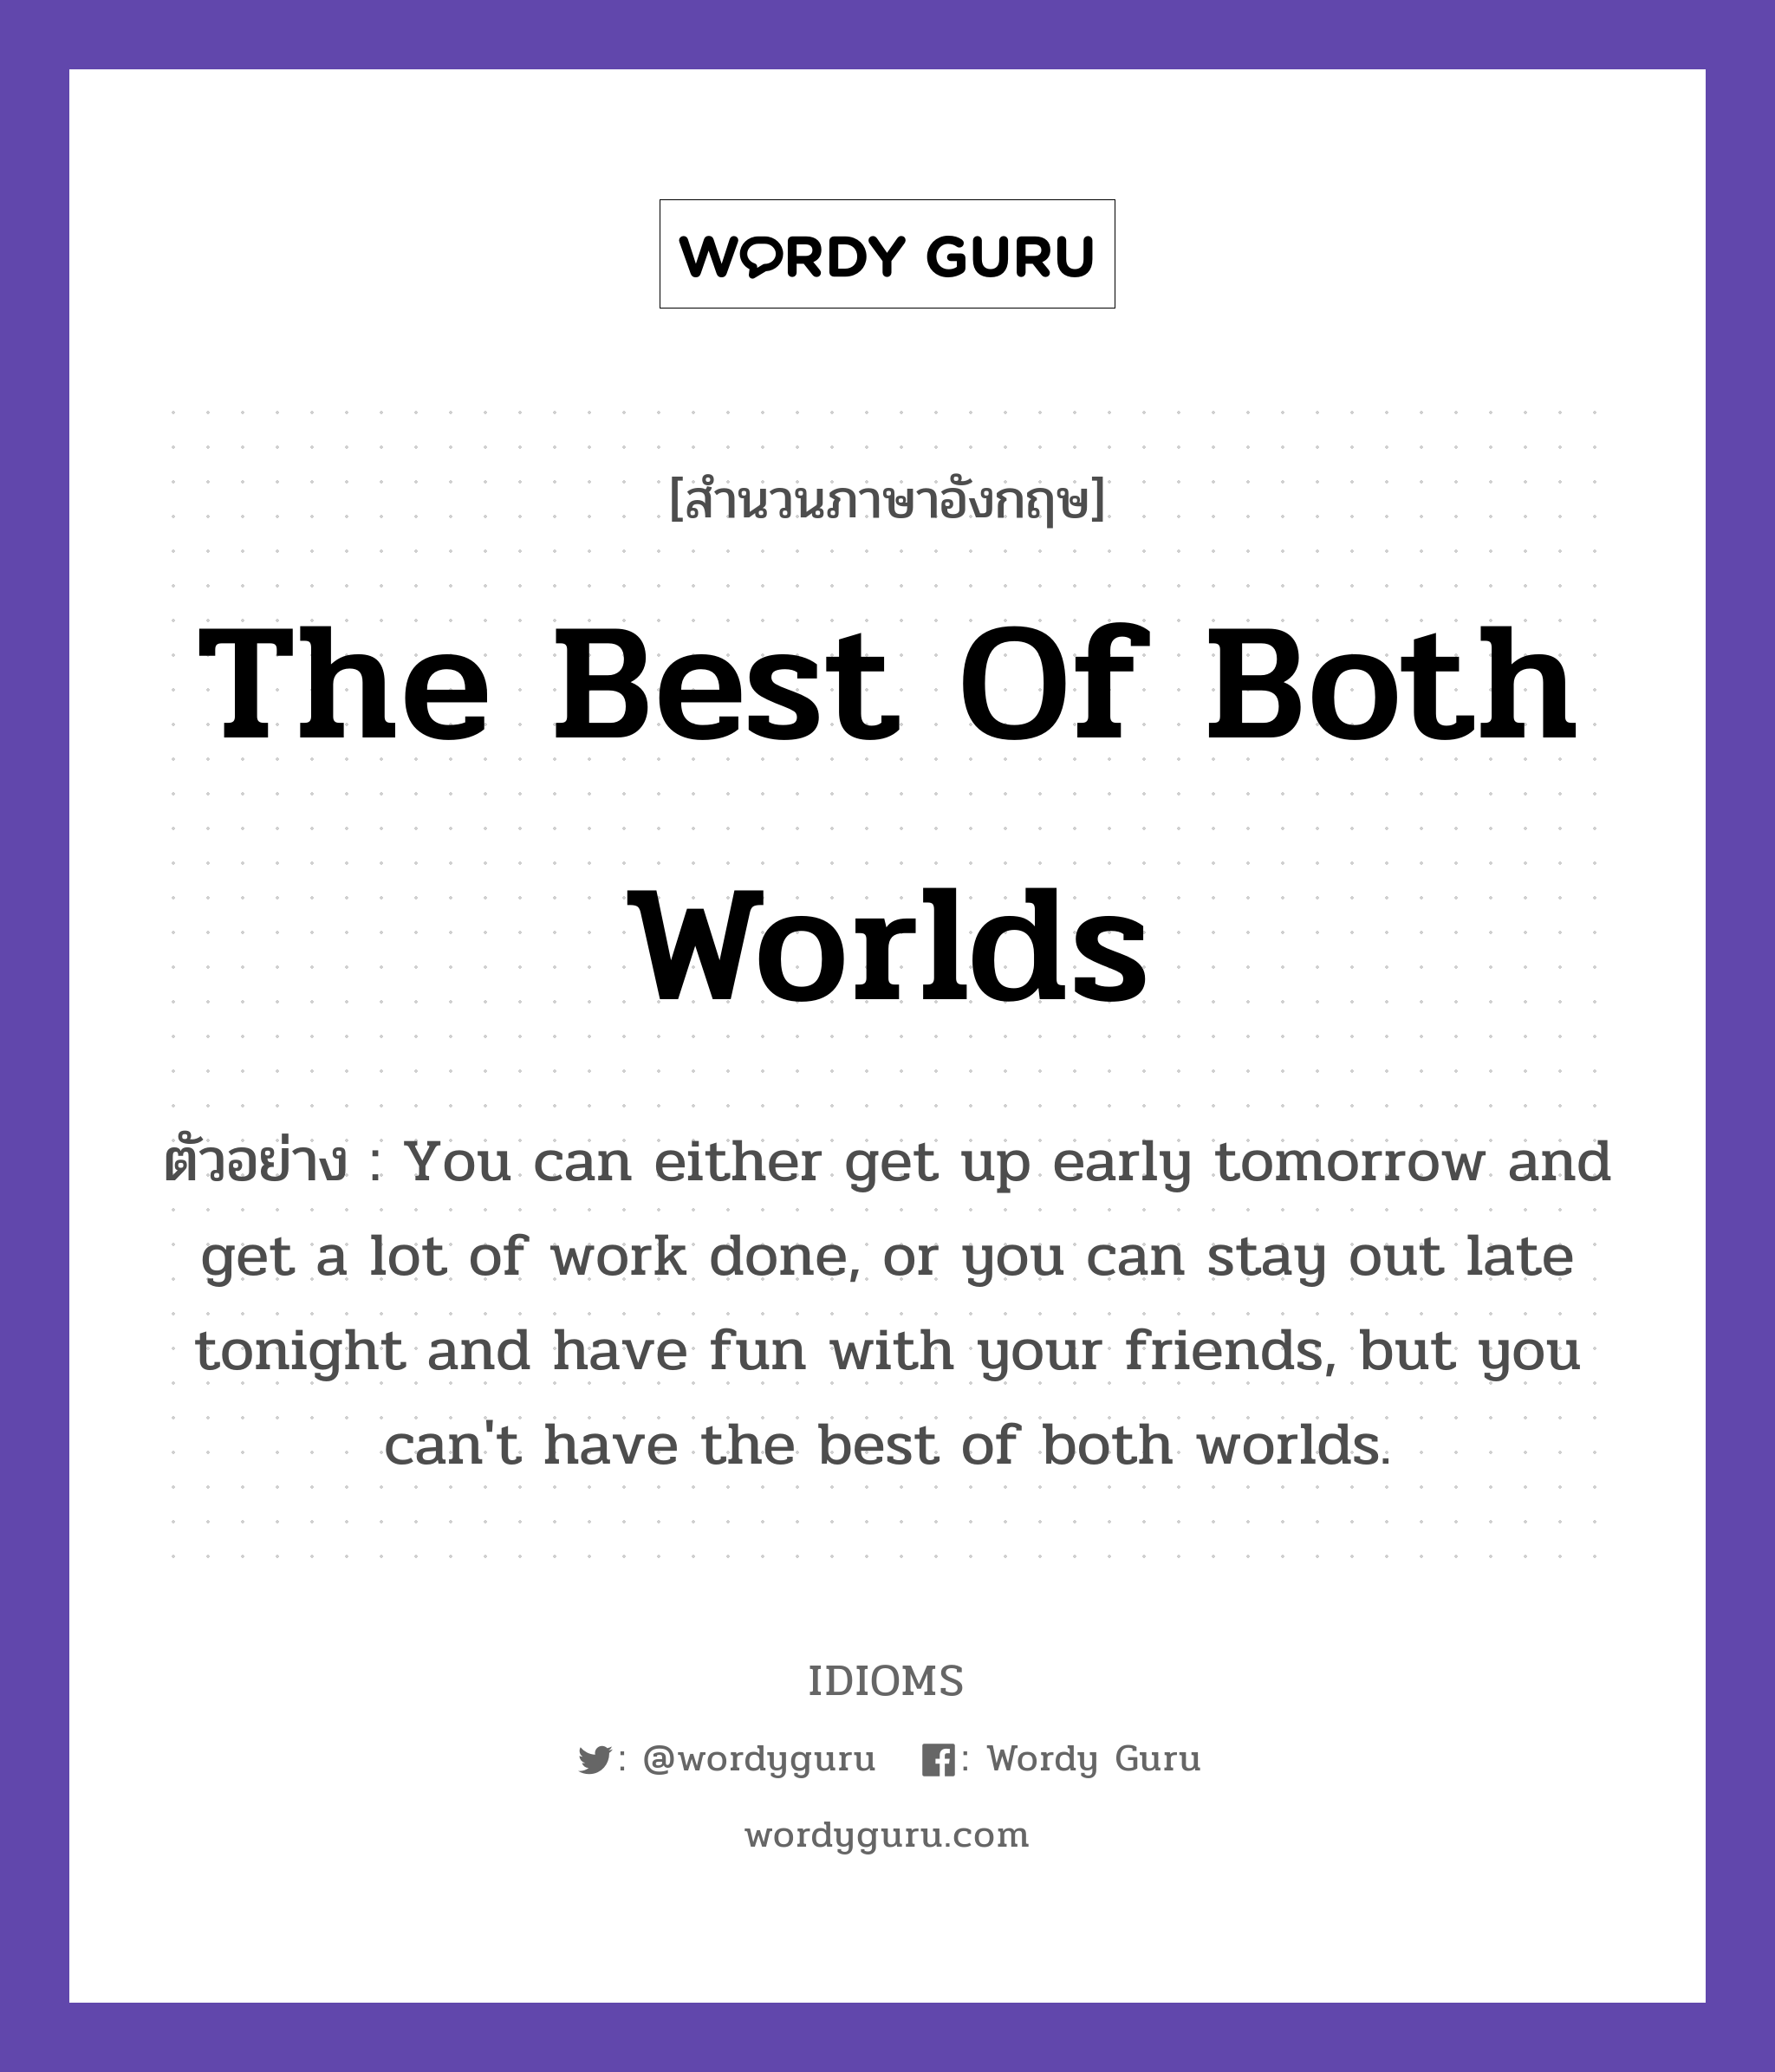 The Best Of Both Worlds แปลว่า?, สำนวนภาษาอังกฤษ The Best Of Both Worlds ตัวอย่าง You can either get up early tomorrow and get a lot of work done, or you can stay out late tonight and have fun with your friends, but you can't have the best of both worlds.